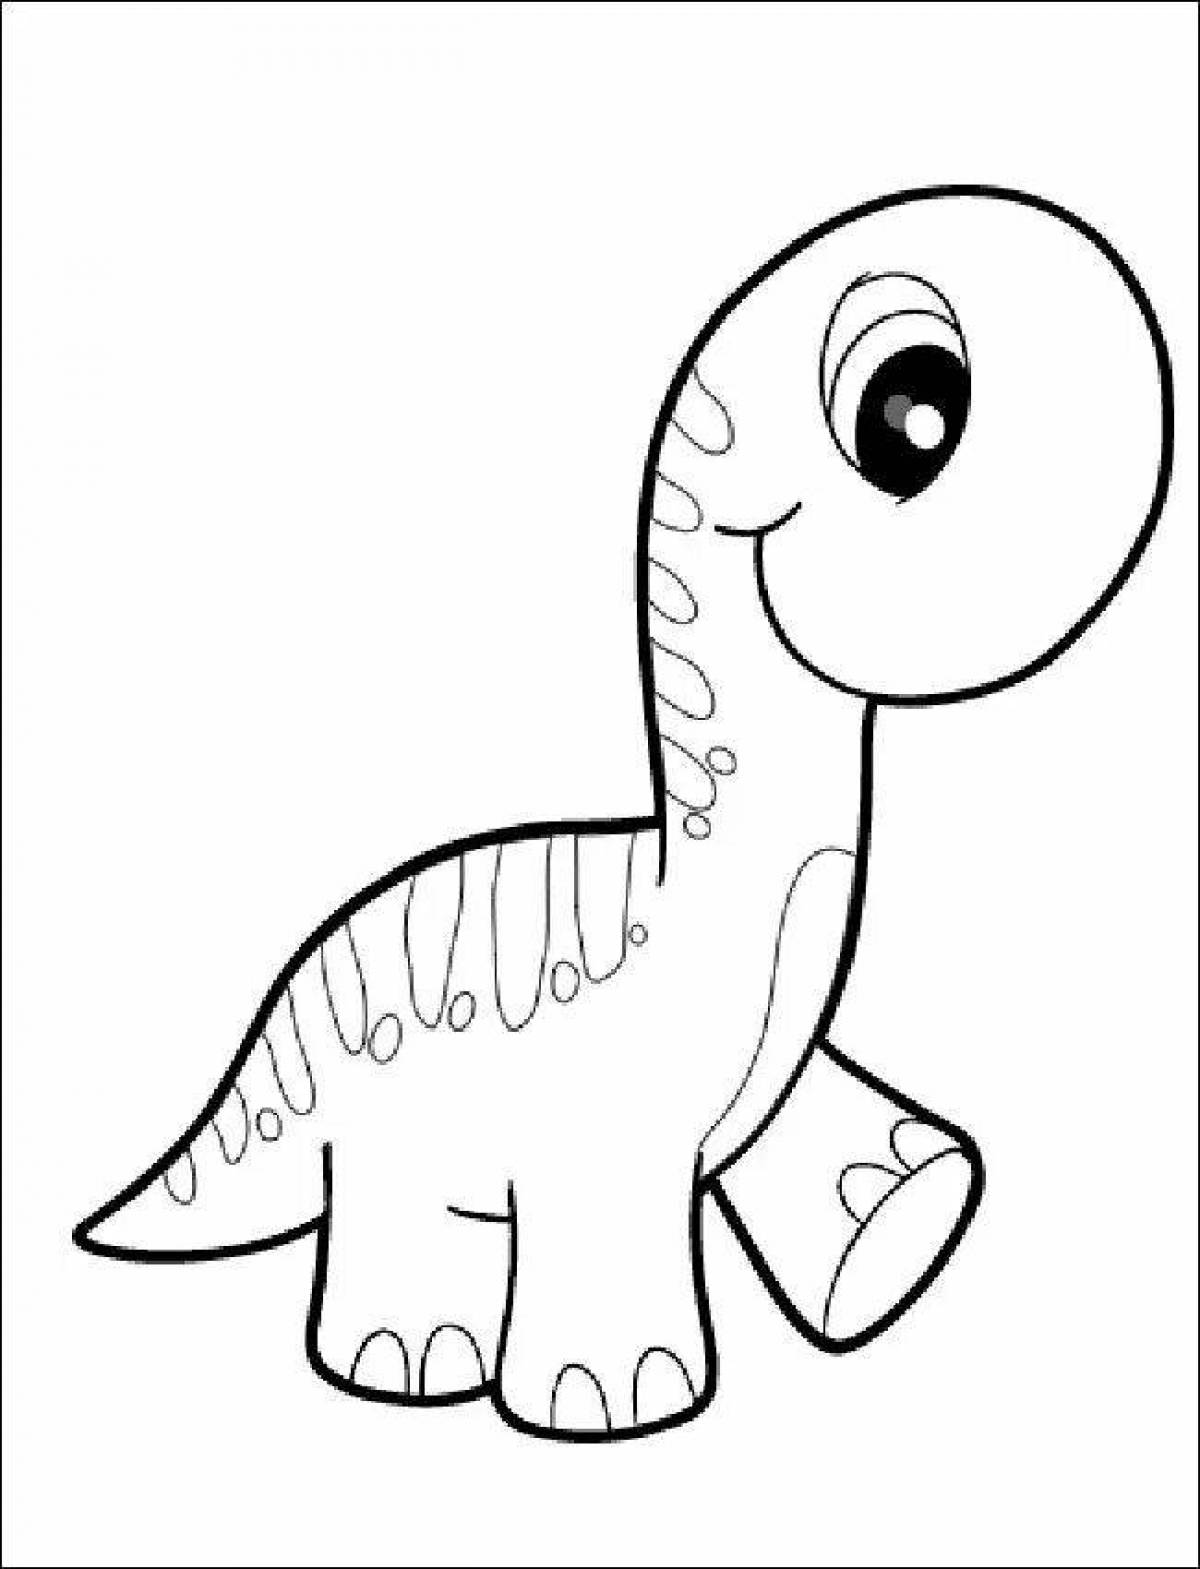 Smiling cute dinosaur coloring page